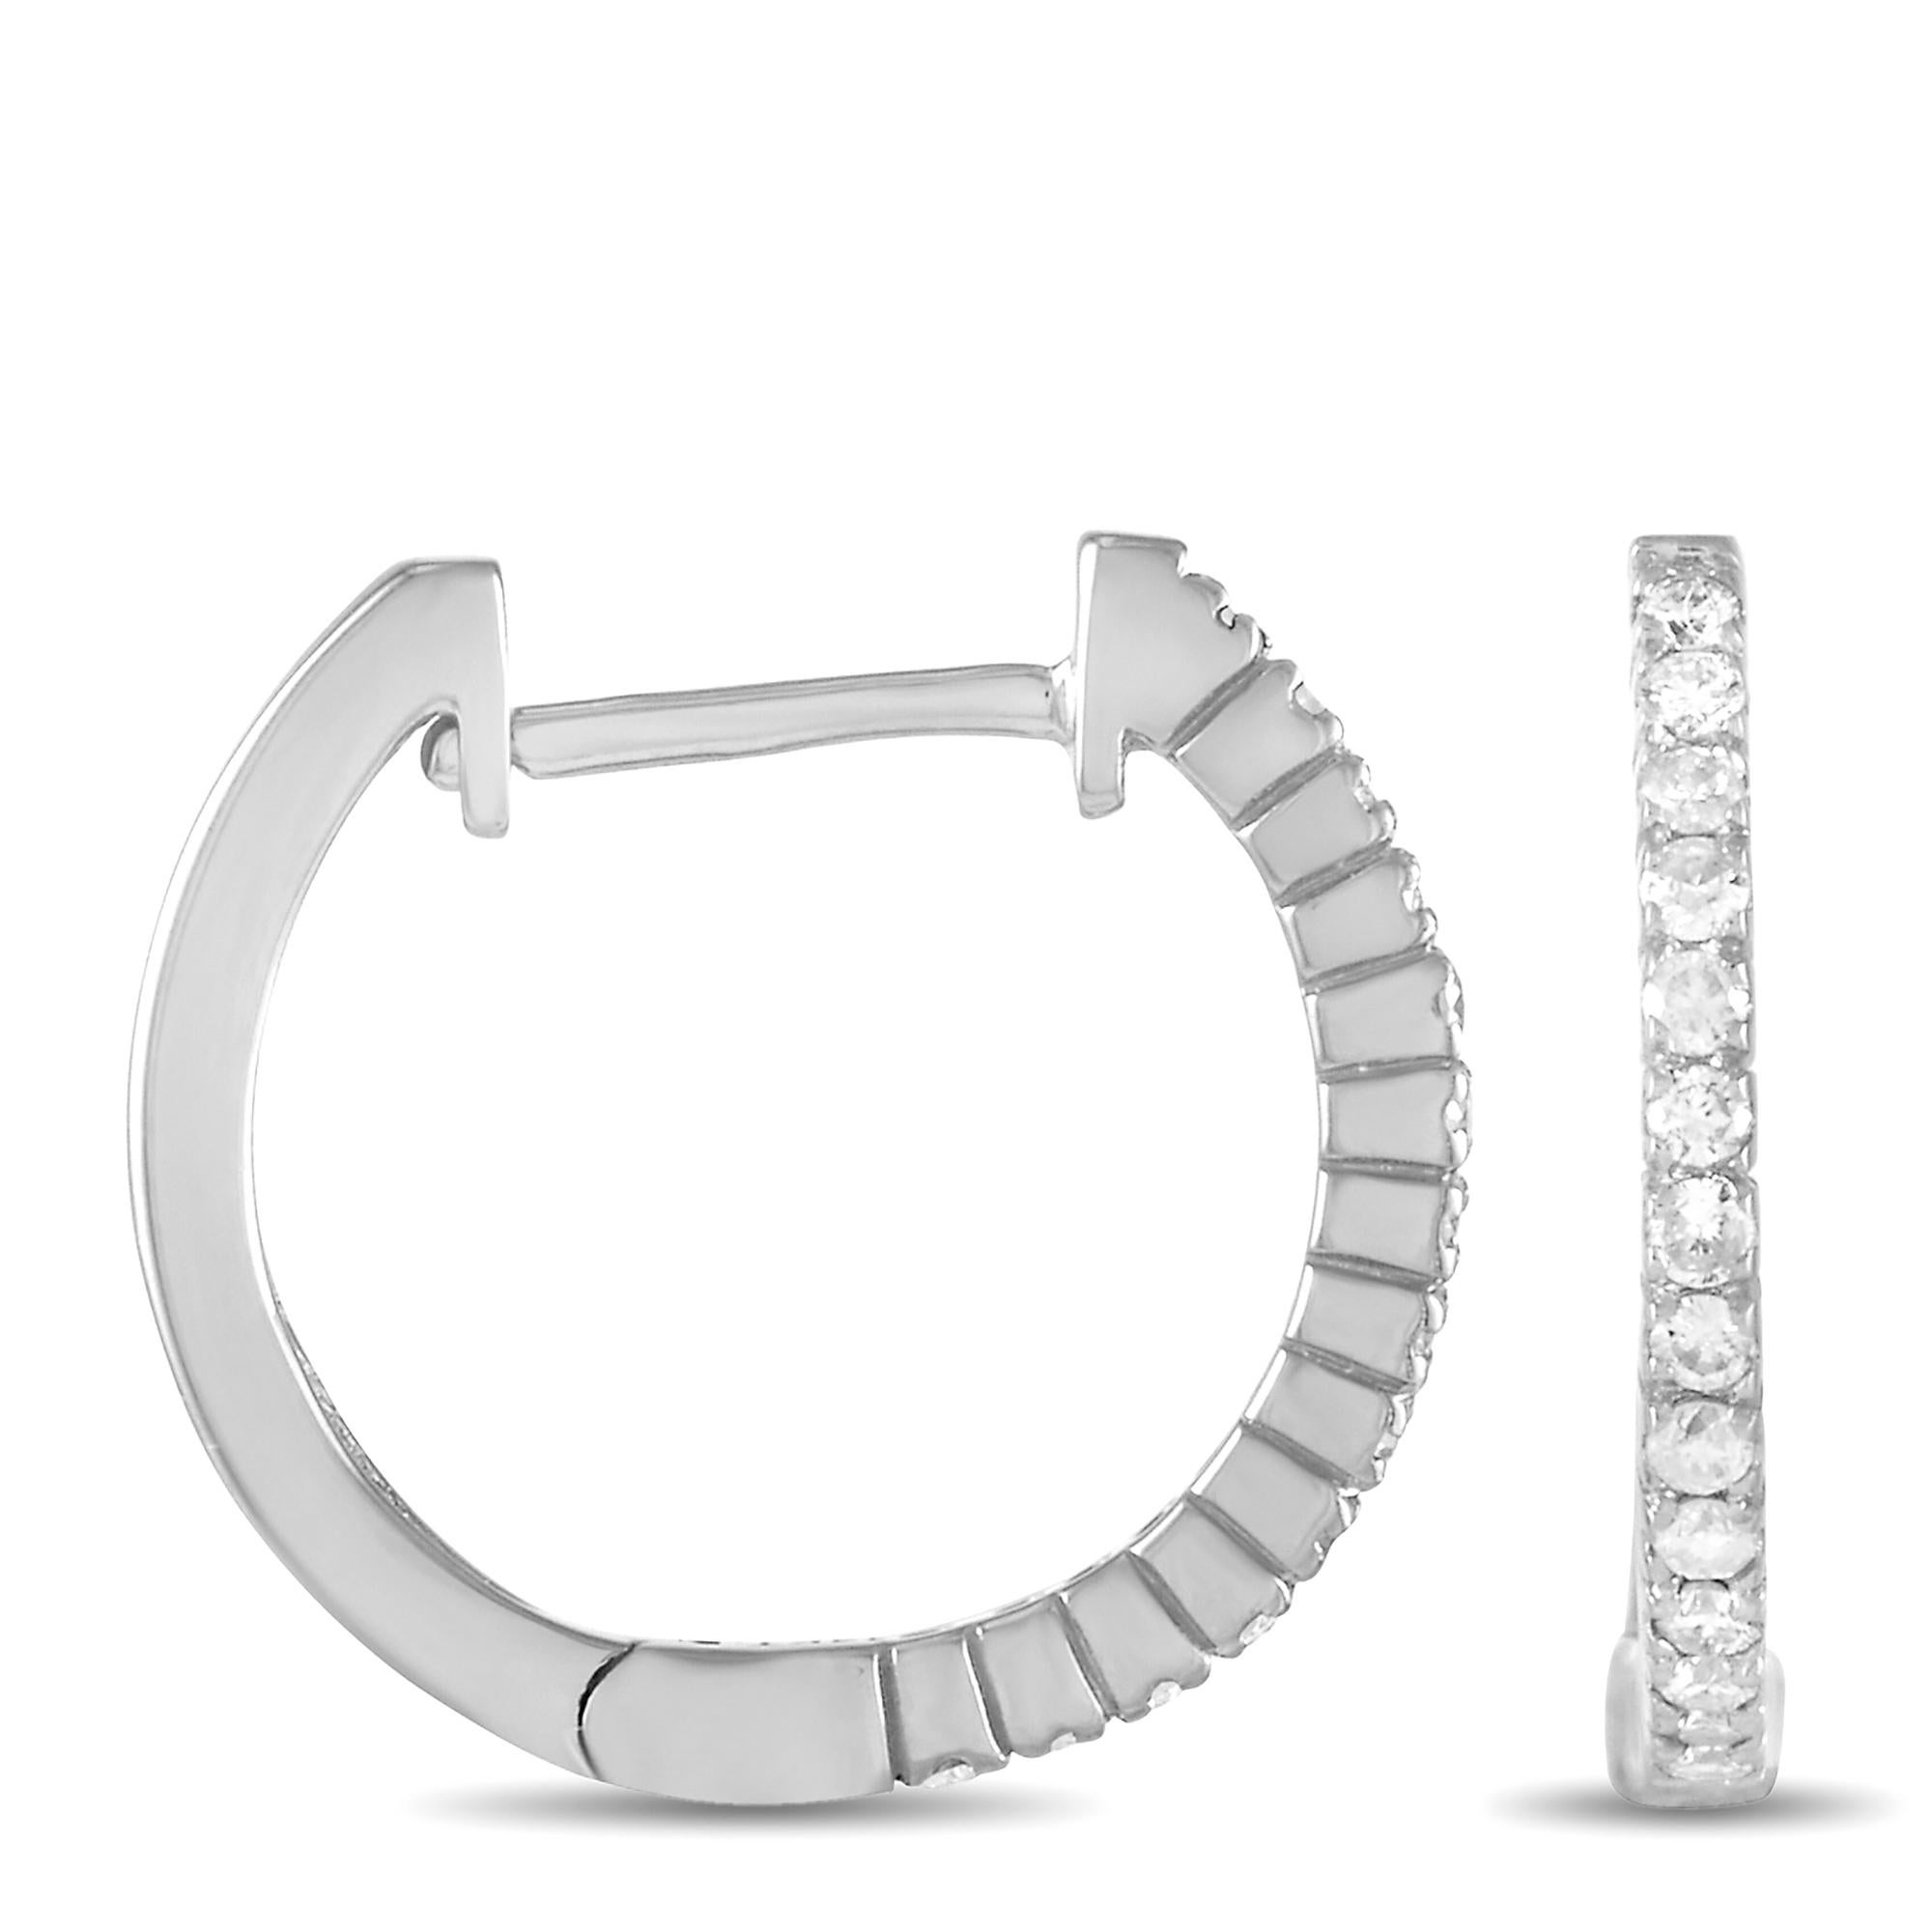 These diamond hoop earrings have undeniable charm. Measuring 0.57 inches round, each hoop comes to life thanks to a row of glittering gemstones set within a classic 14K white gold setting. Together they feature a total weight of 0.27 carats and